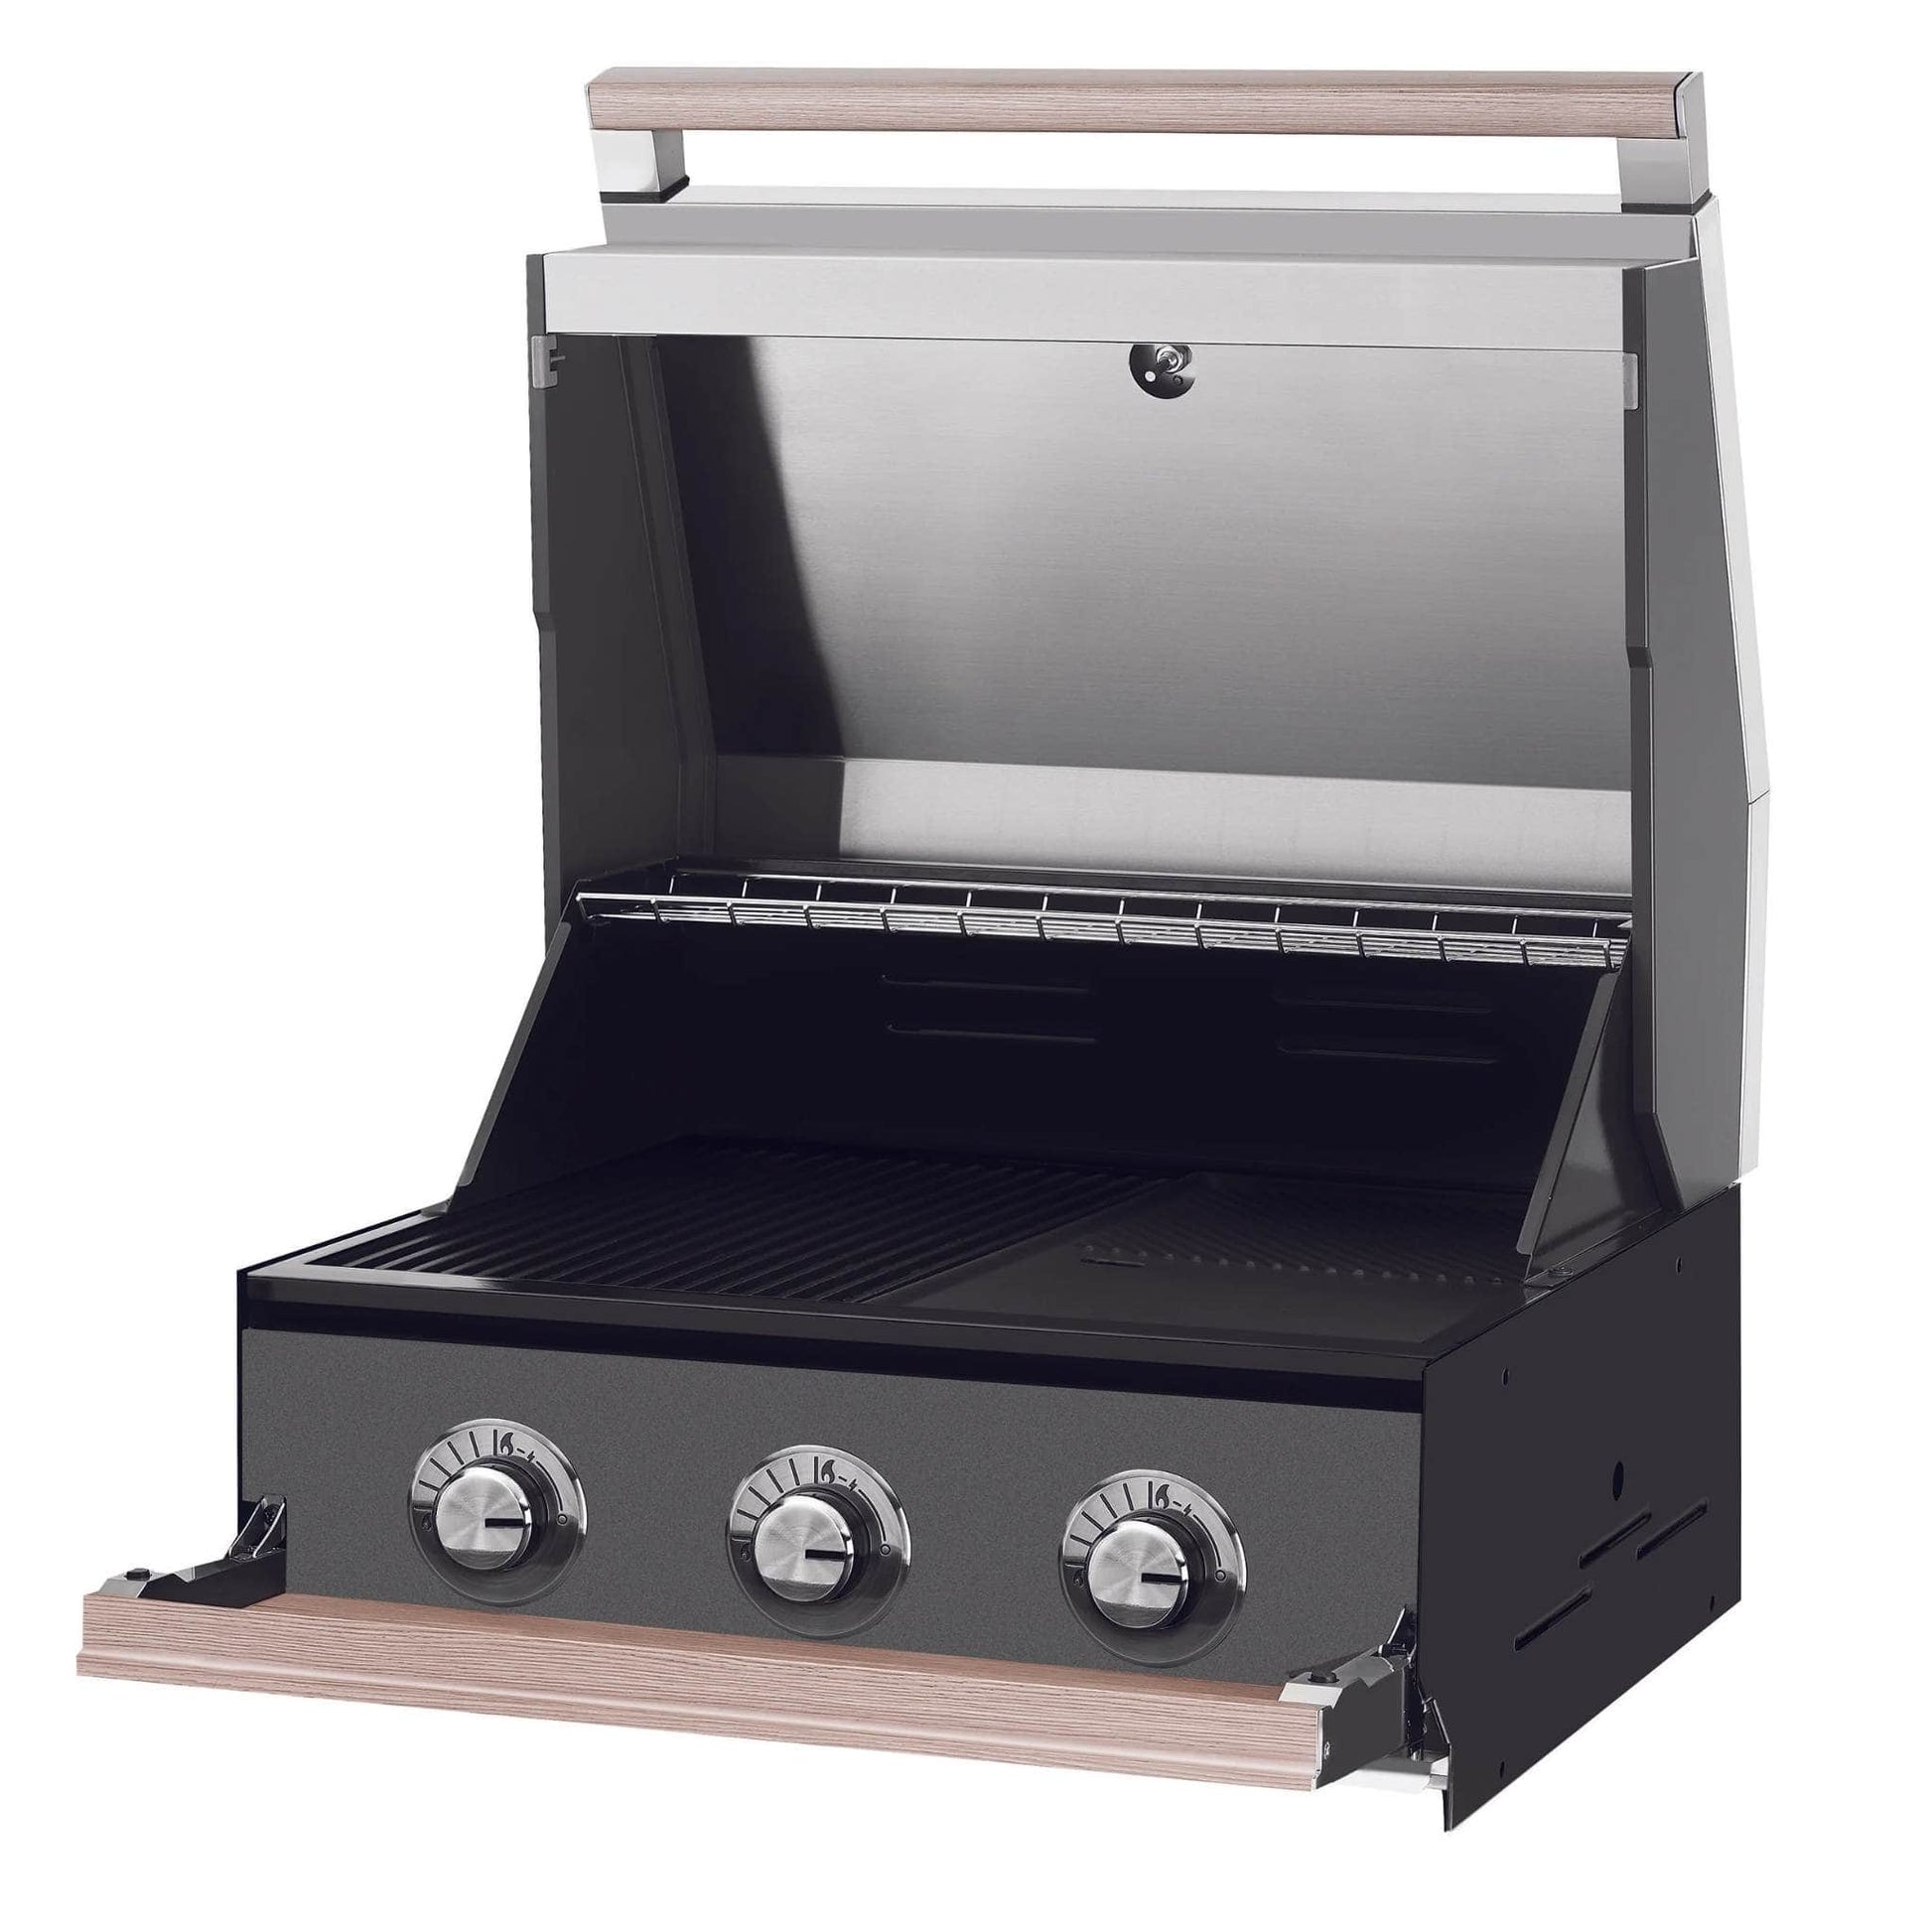 BeefEater 1500 Series - 3 Burner Built In BBQ